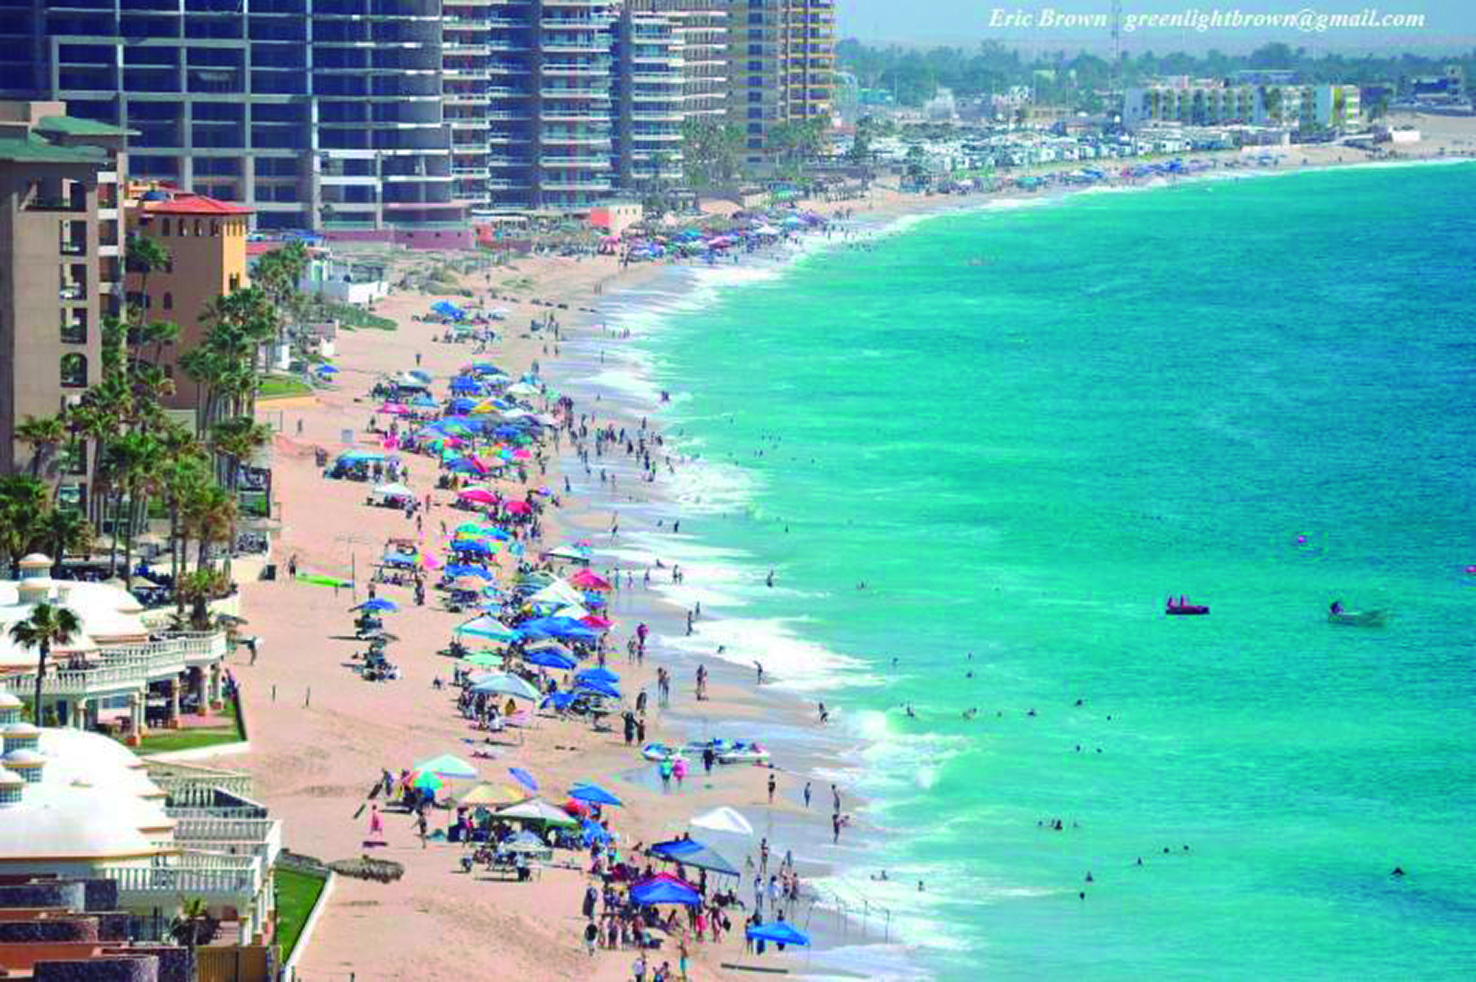 More Than 2.2 Million Foreign and National Tourists Visited the Beaches of Puerto Peñasco During 2019